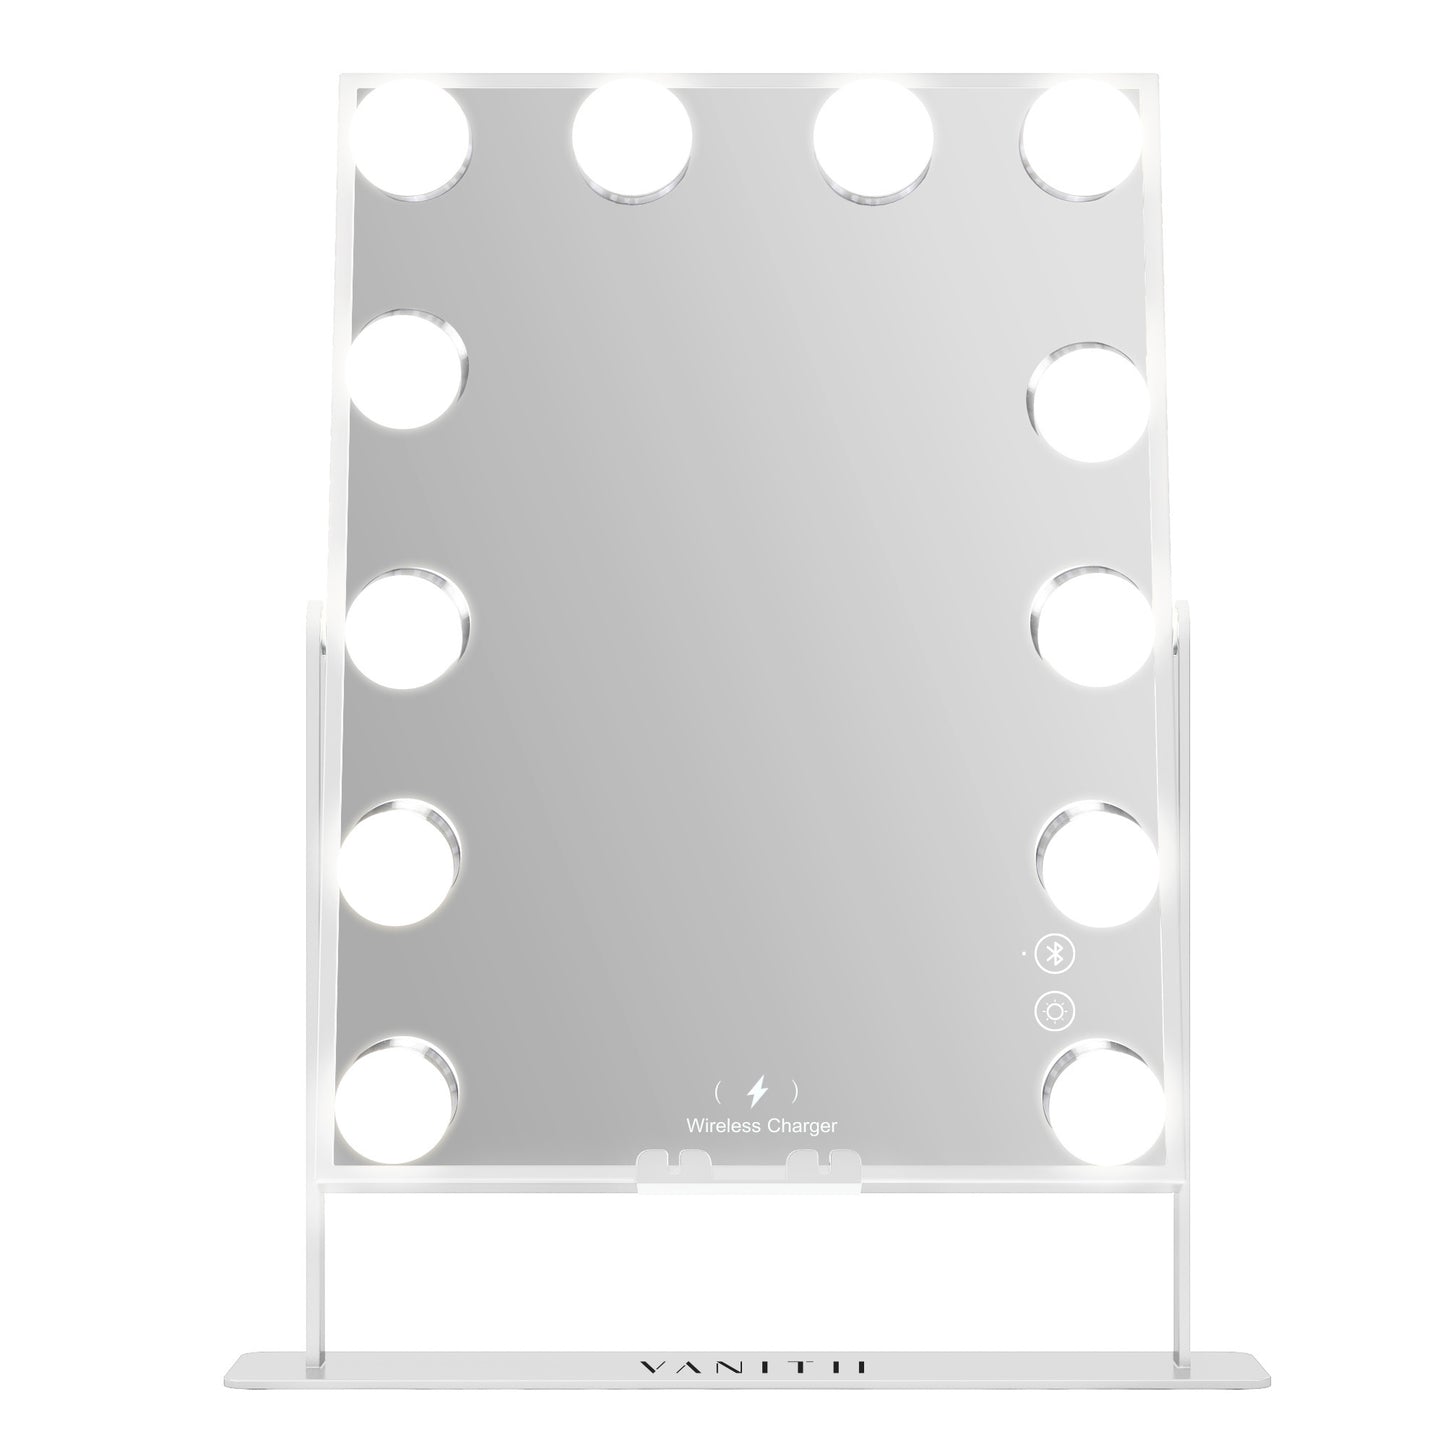 Hathaway Hollywood Slim Vanity Mirror with Wireless Charging L - 12 Dimmable LED Bulbs